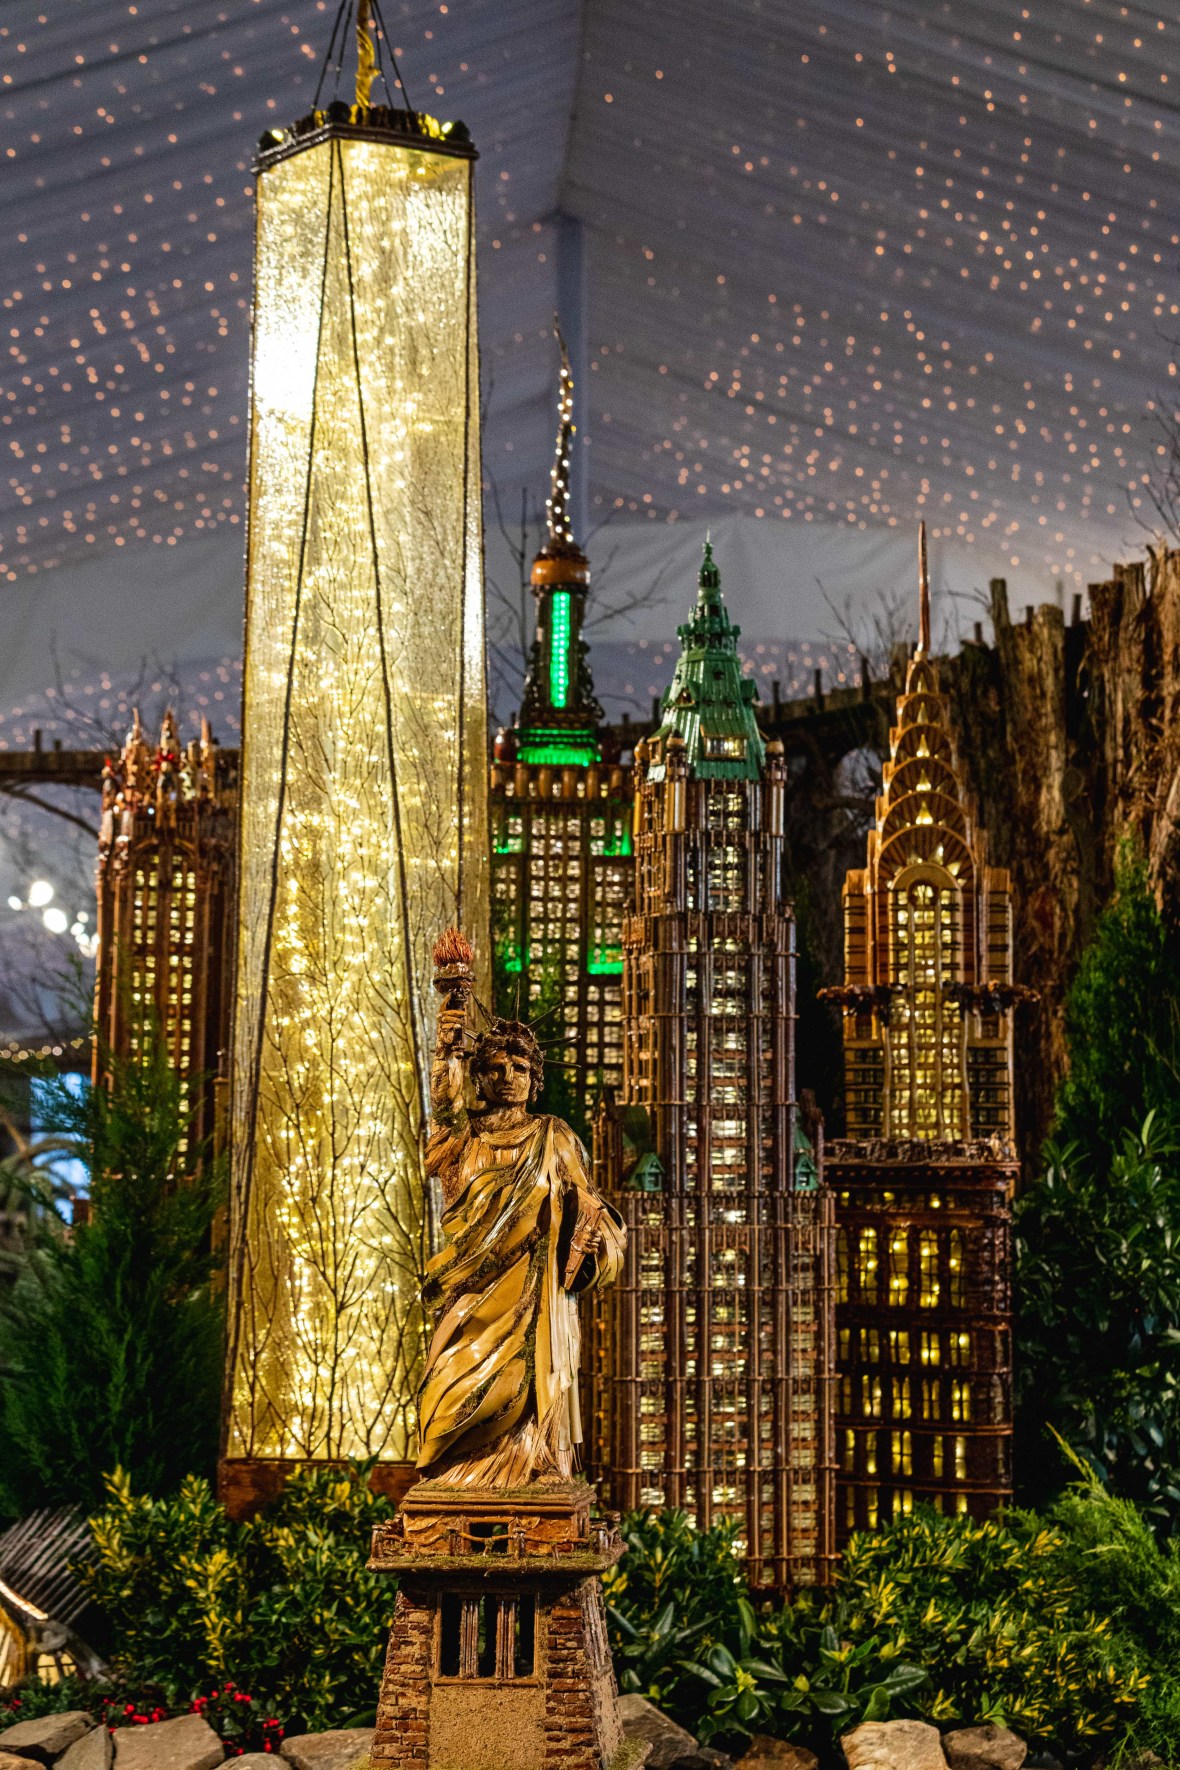 Miniature Statue of Liberty and other famous NYC buildings at NYBG's holiday train show